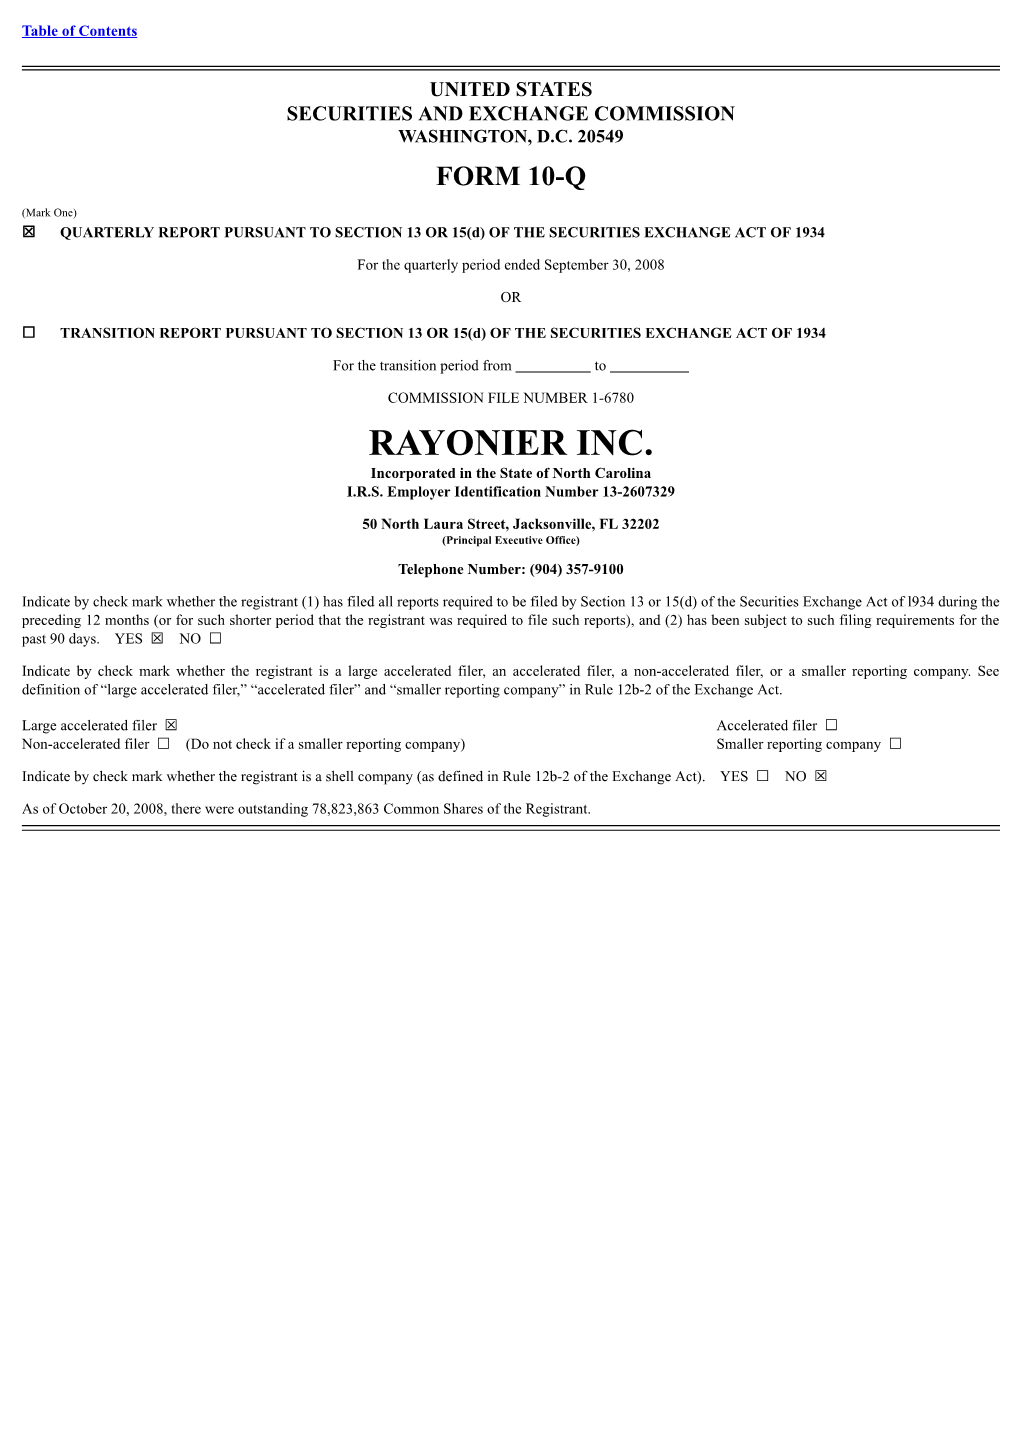 RAYONIER INC. Incorporated in the State of North Carolina I.R.S